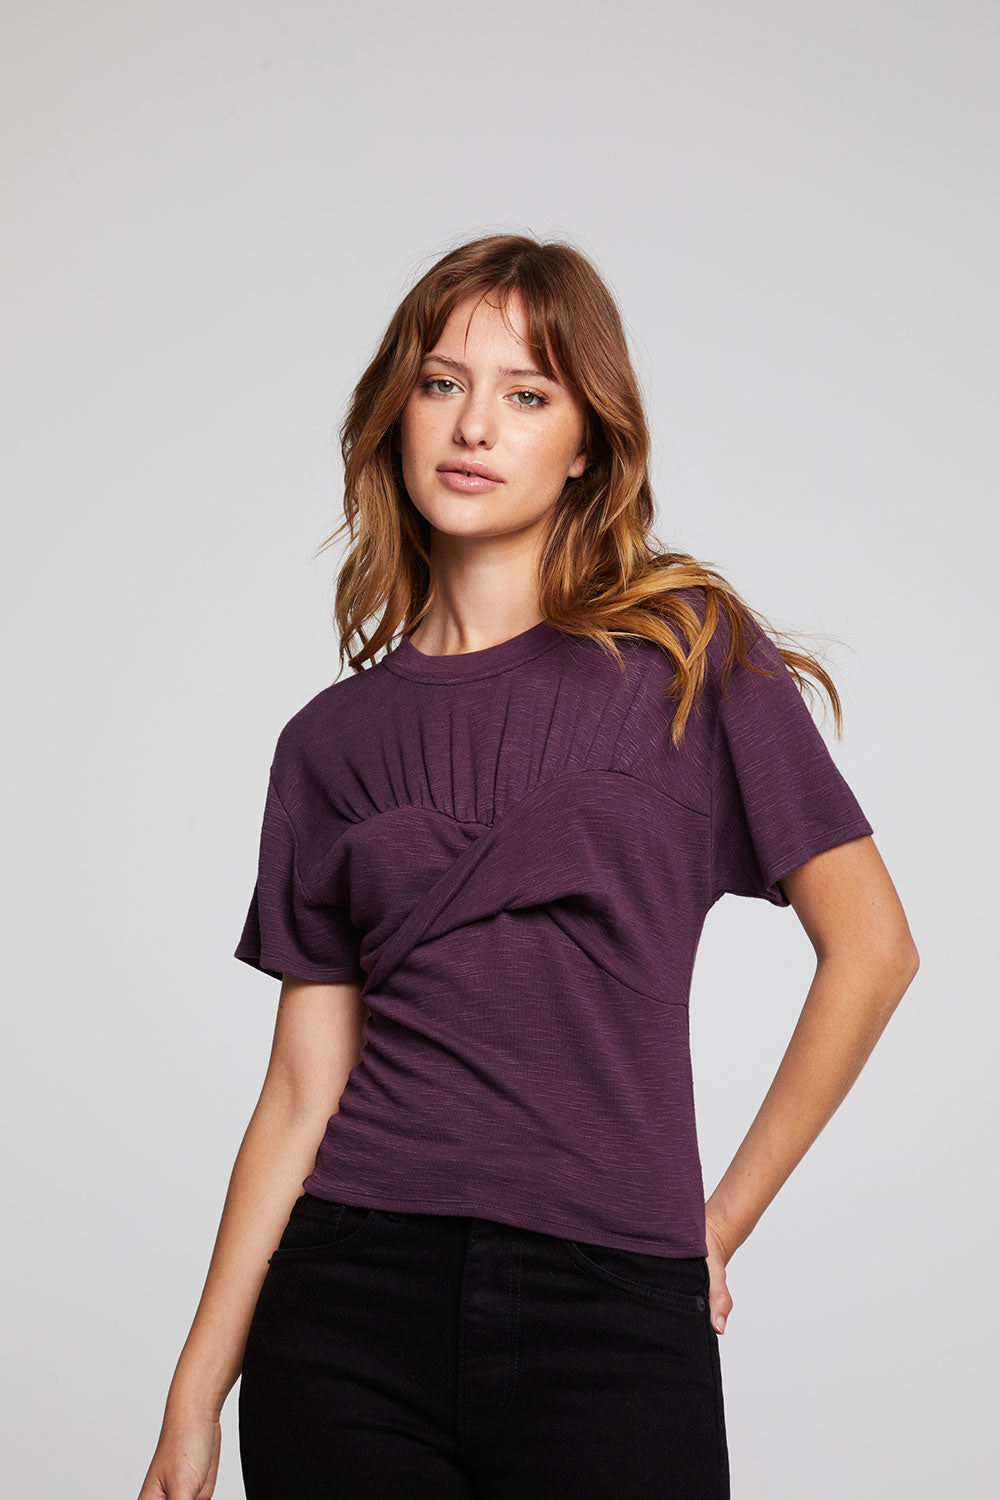 Evelynn Plum Perfect Tee WOMENS chaserbrand